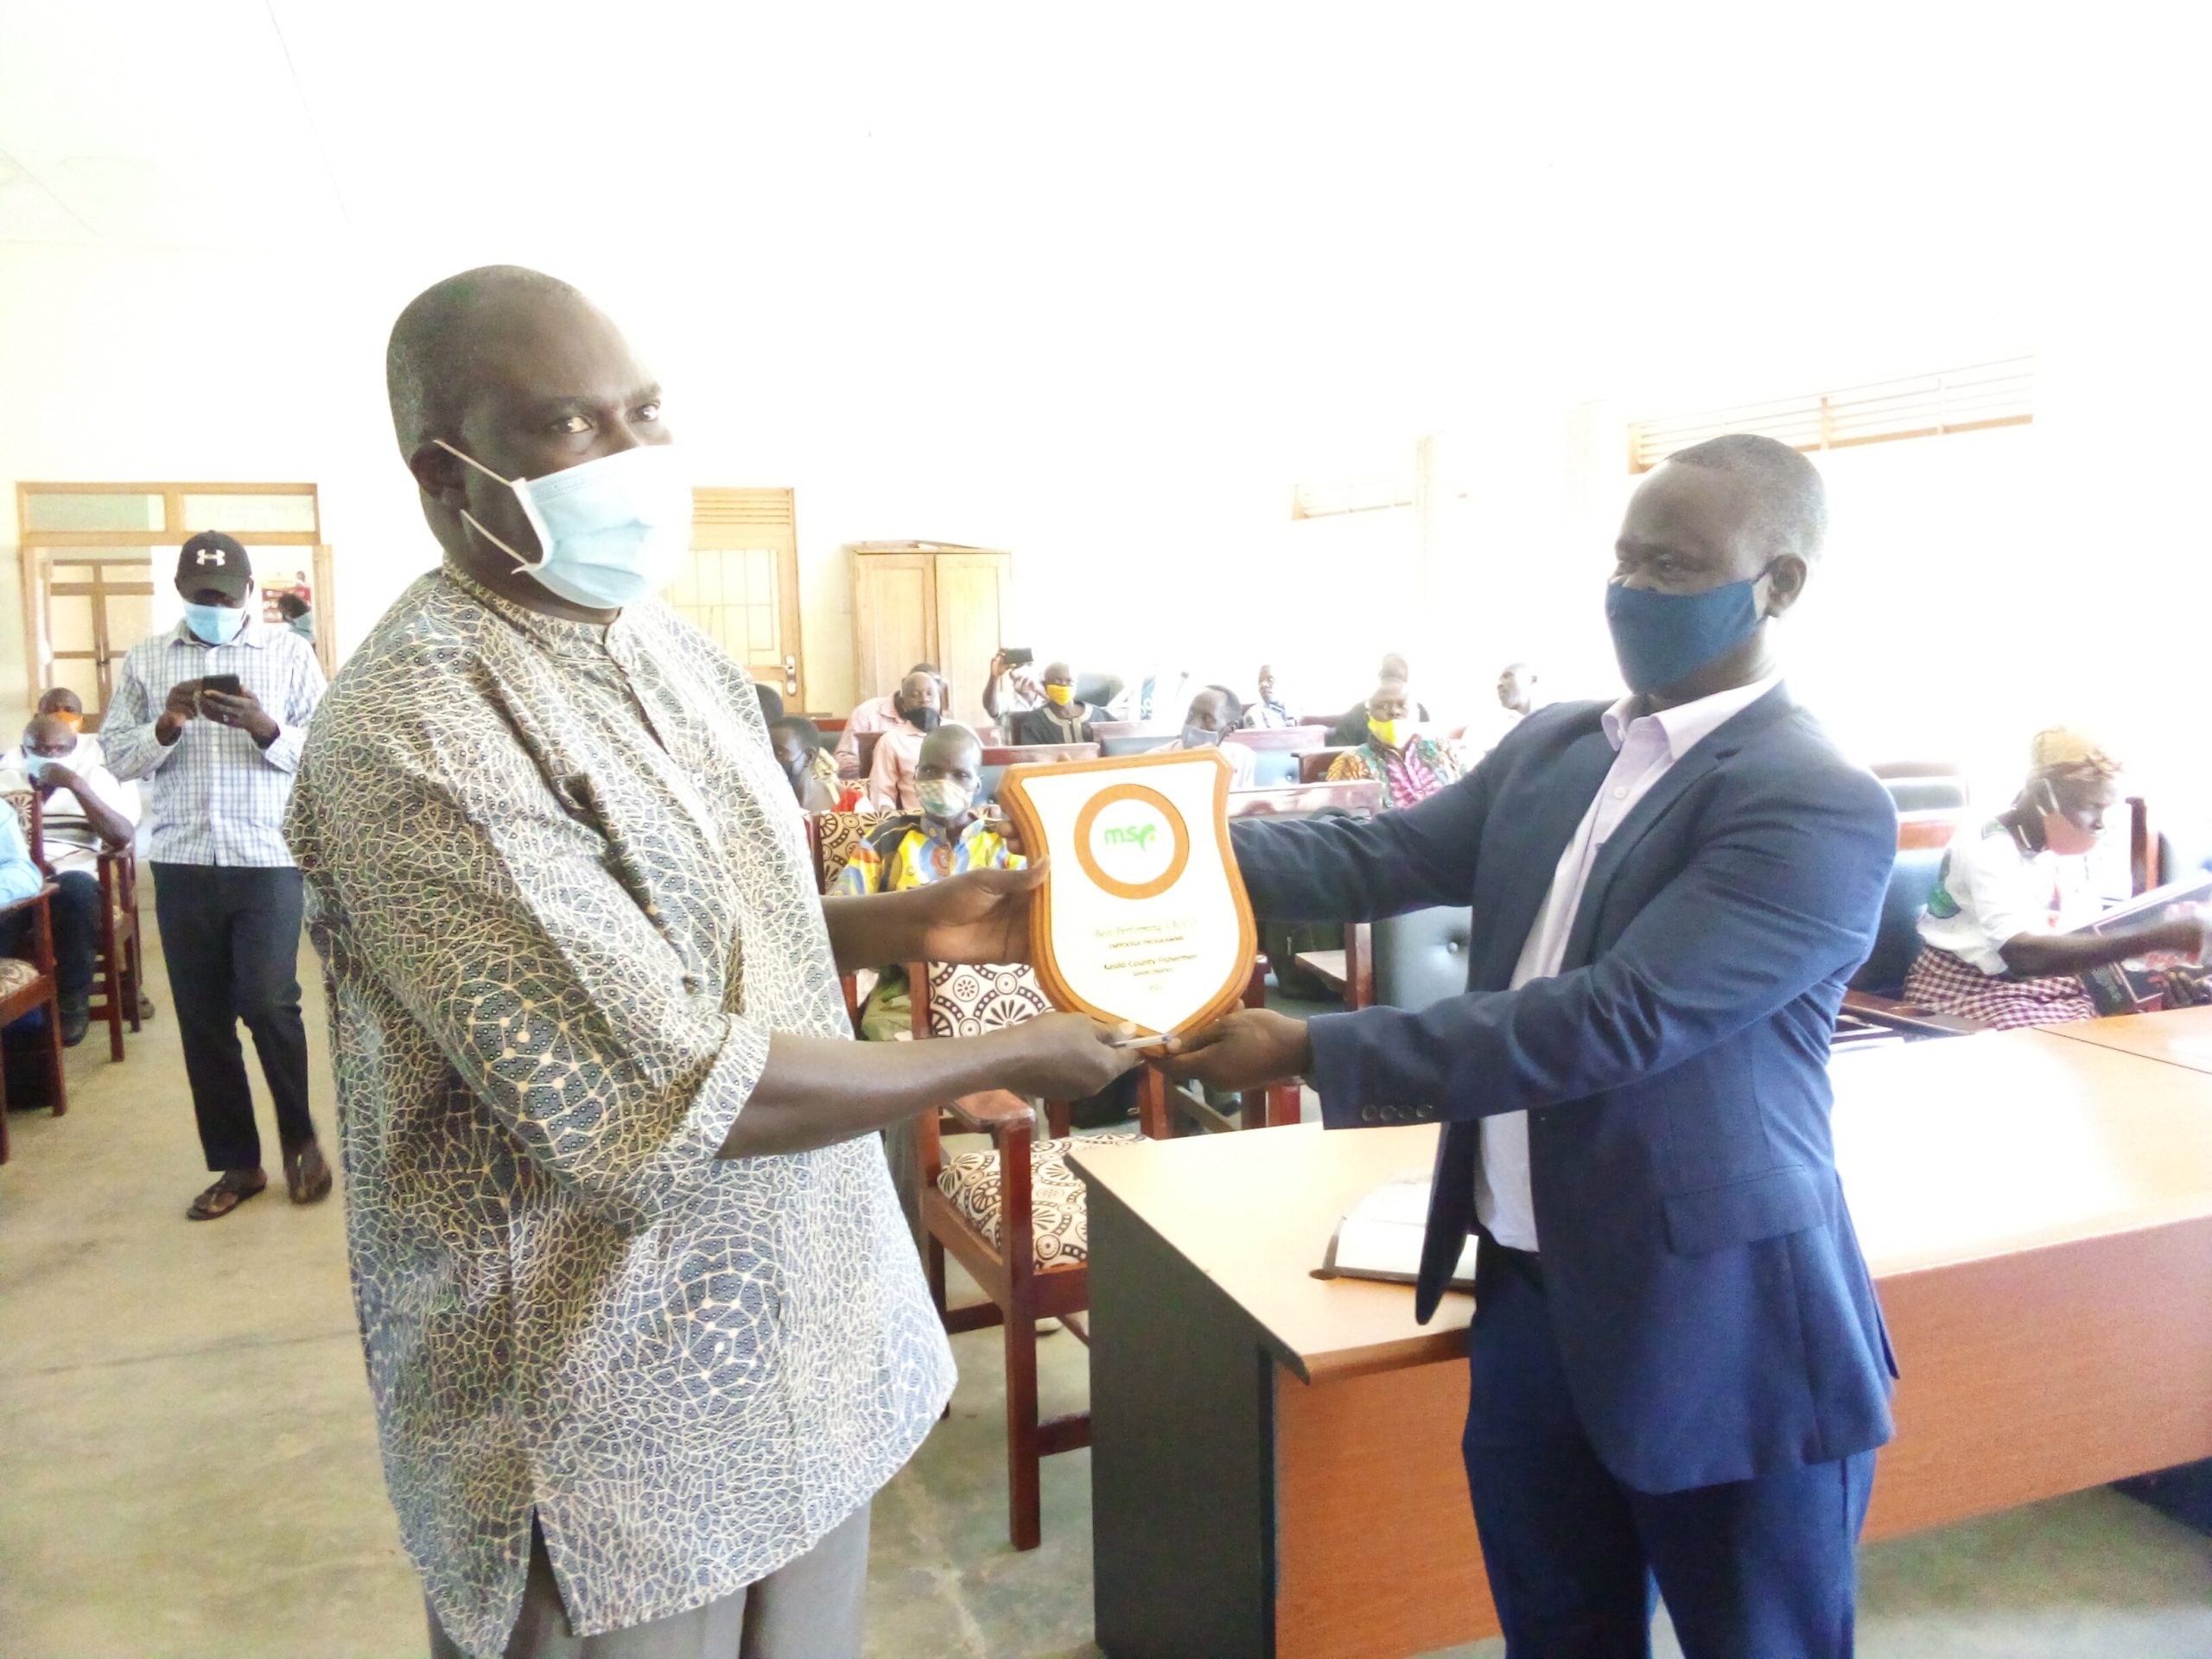 EXCLUSIVE: UGX 90M Emyooga Funds Allocated to Wrong Beneficiaries in Serere